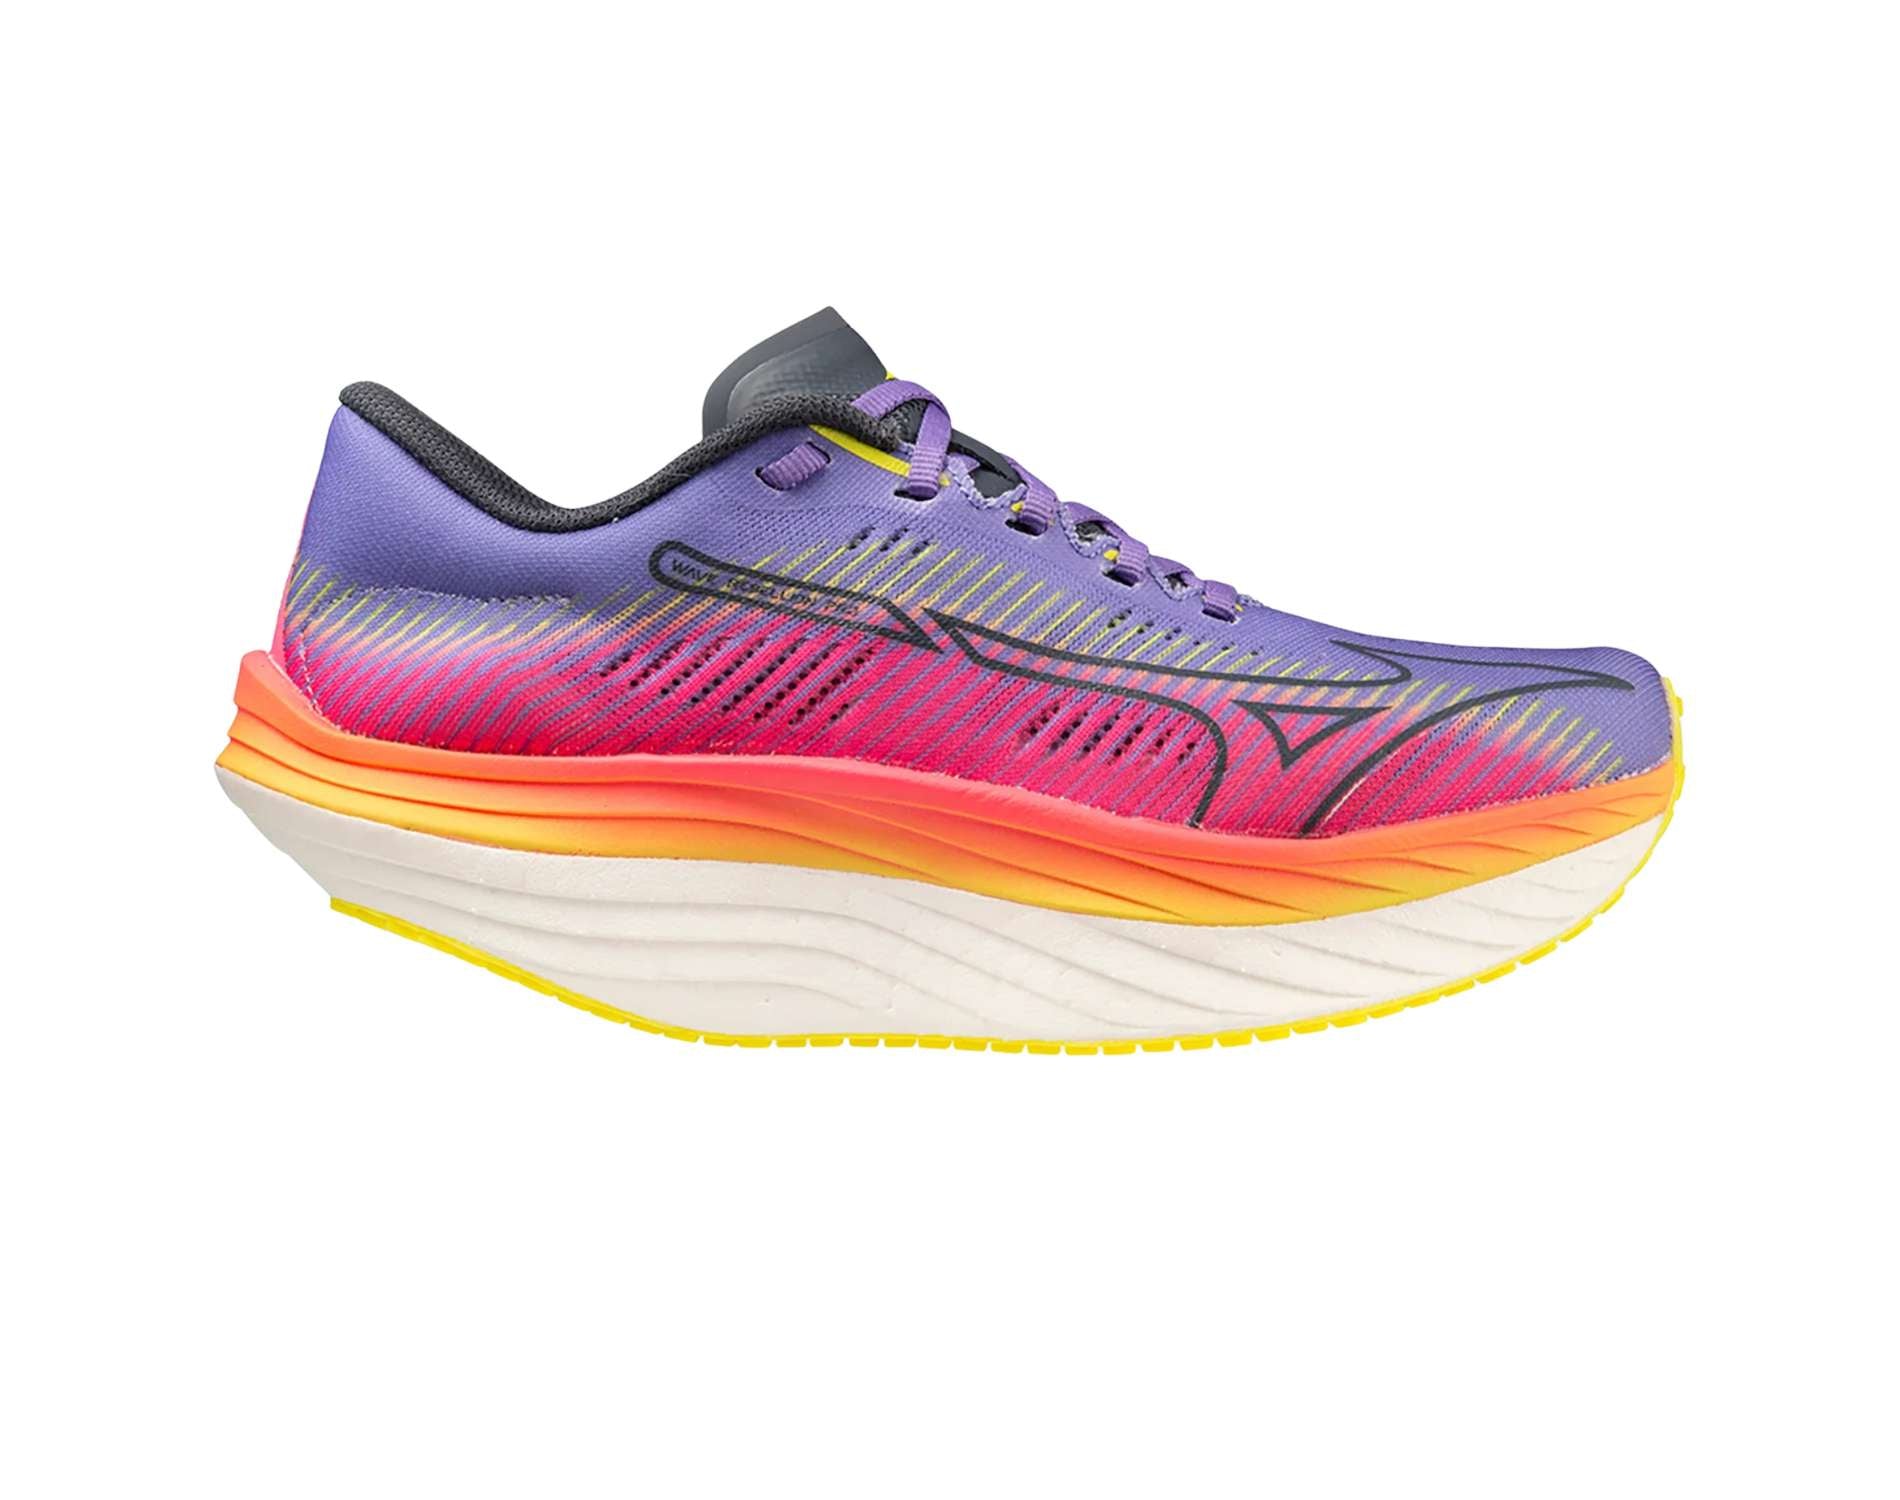 mizuno wave rebellion pro womens running shoe in b standard width in high-vis pink ombre blue purple punch colour